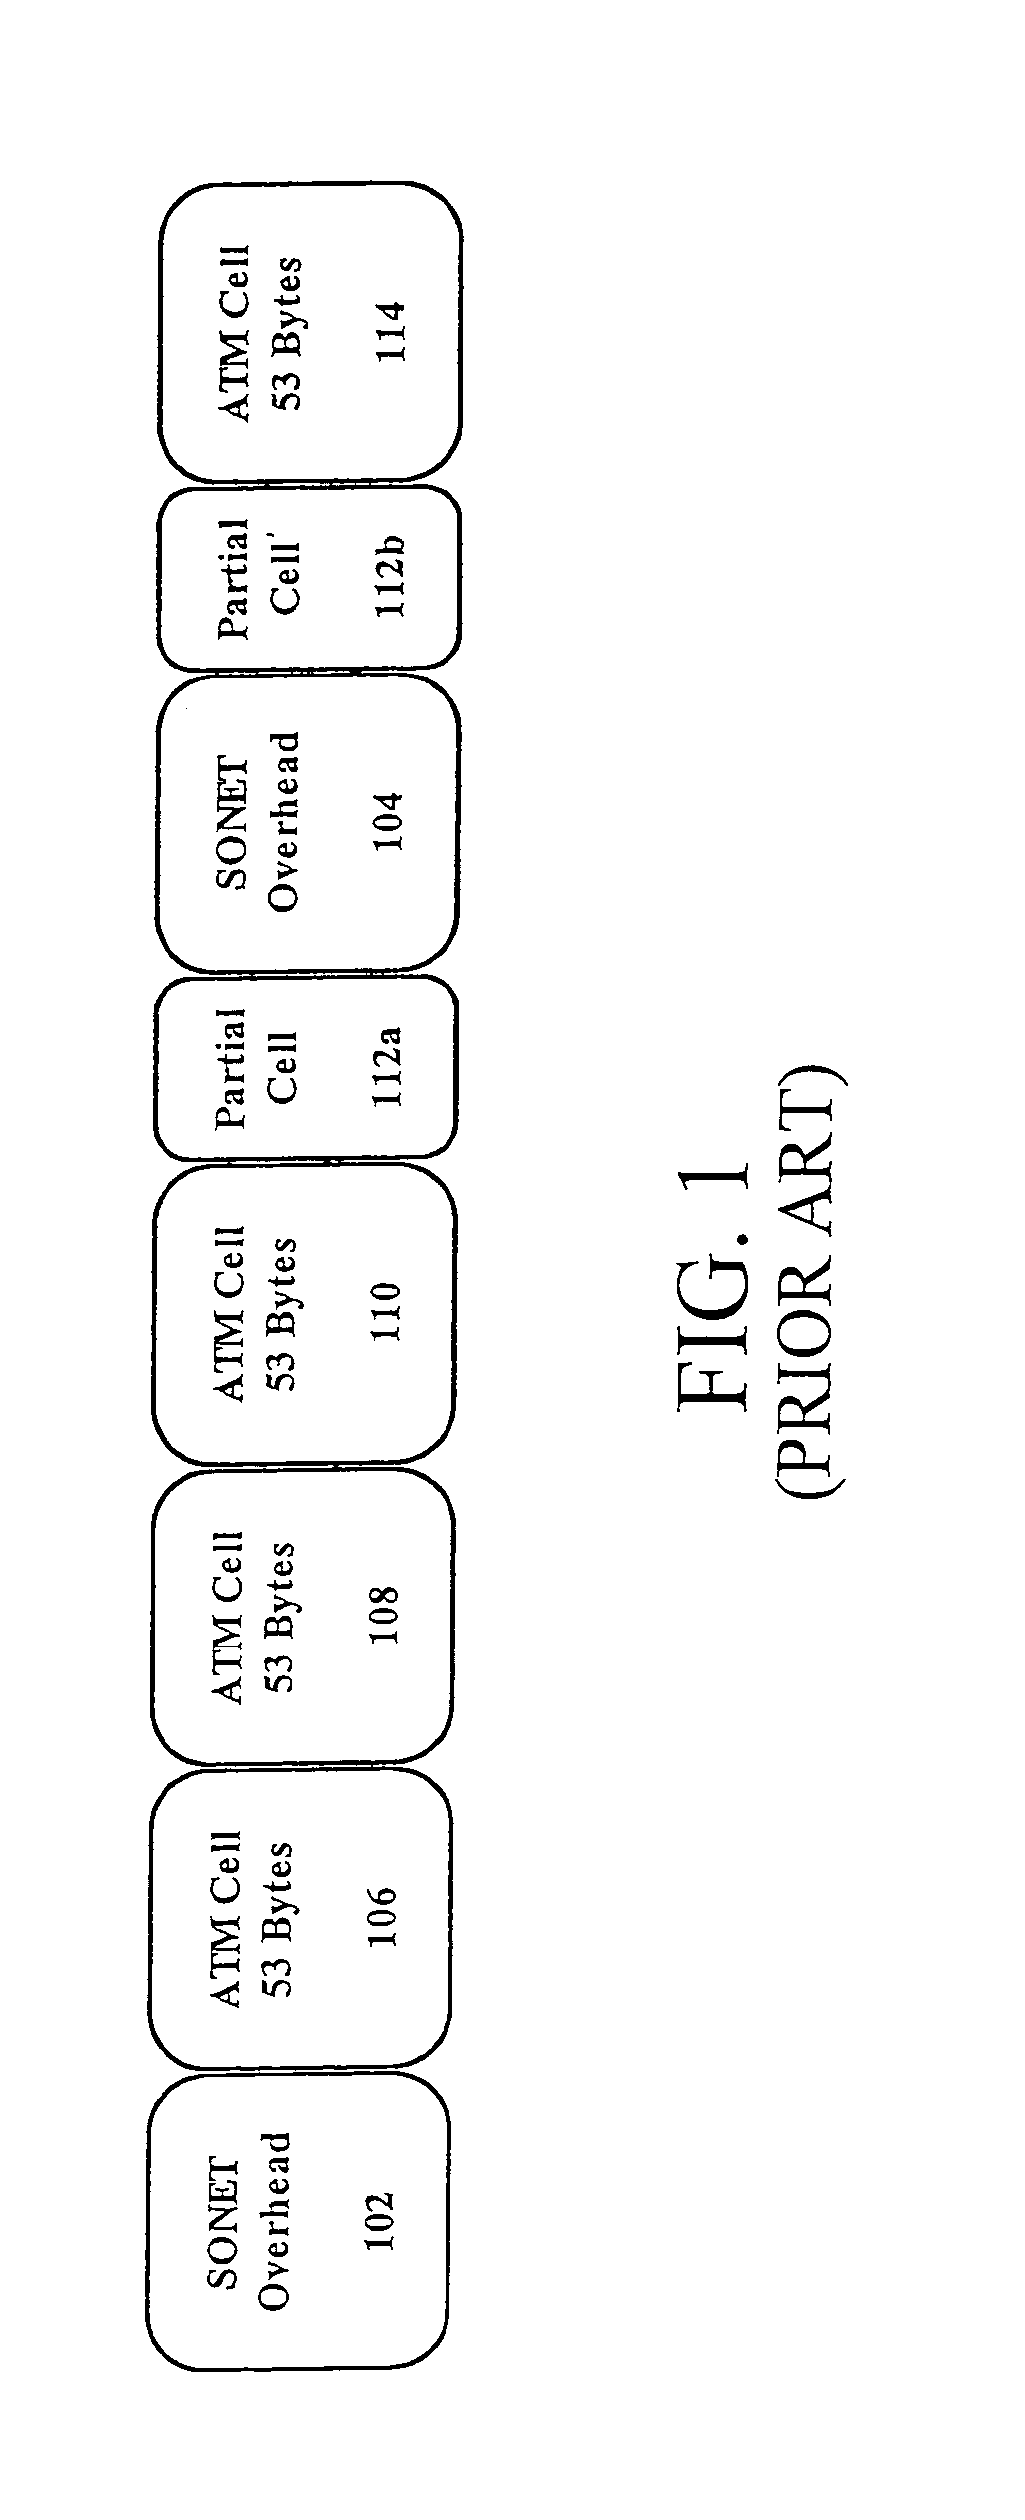 Methods and apparatus for dynamically allocating bandwidth between ATM cells and packets